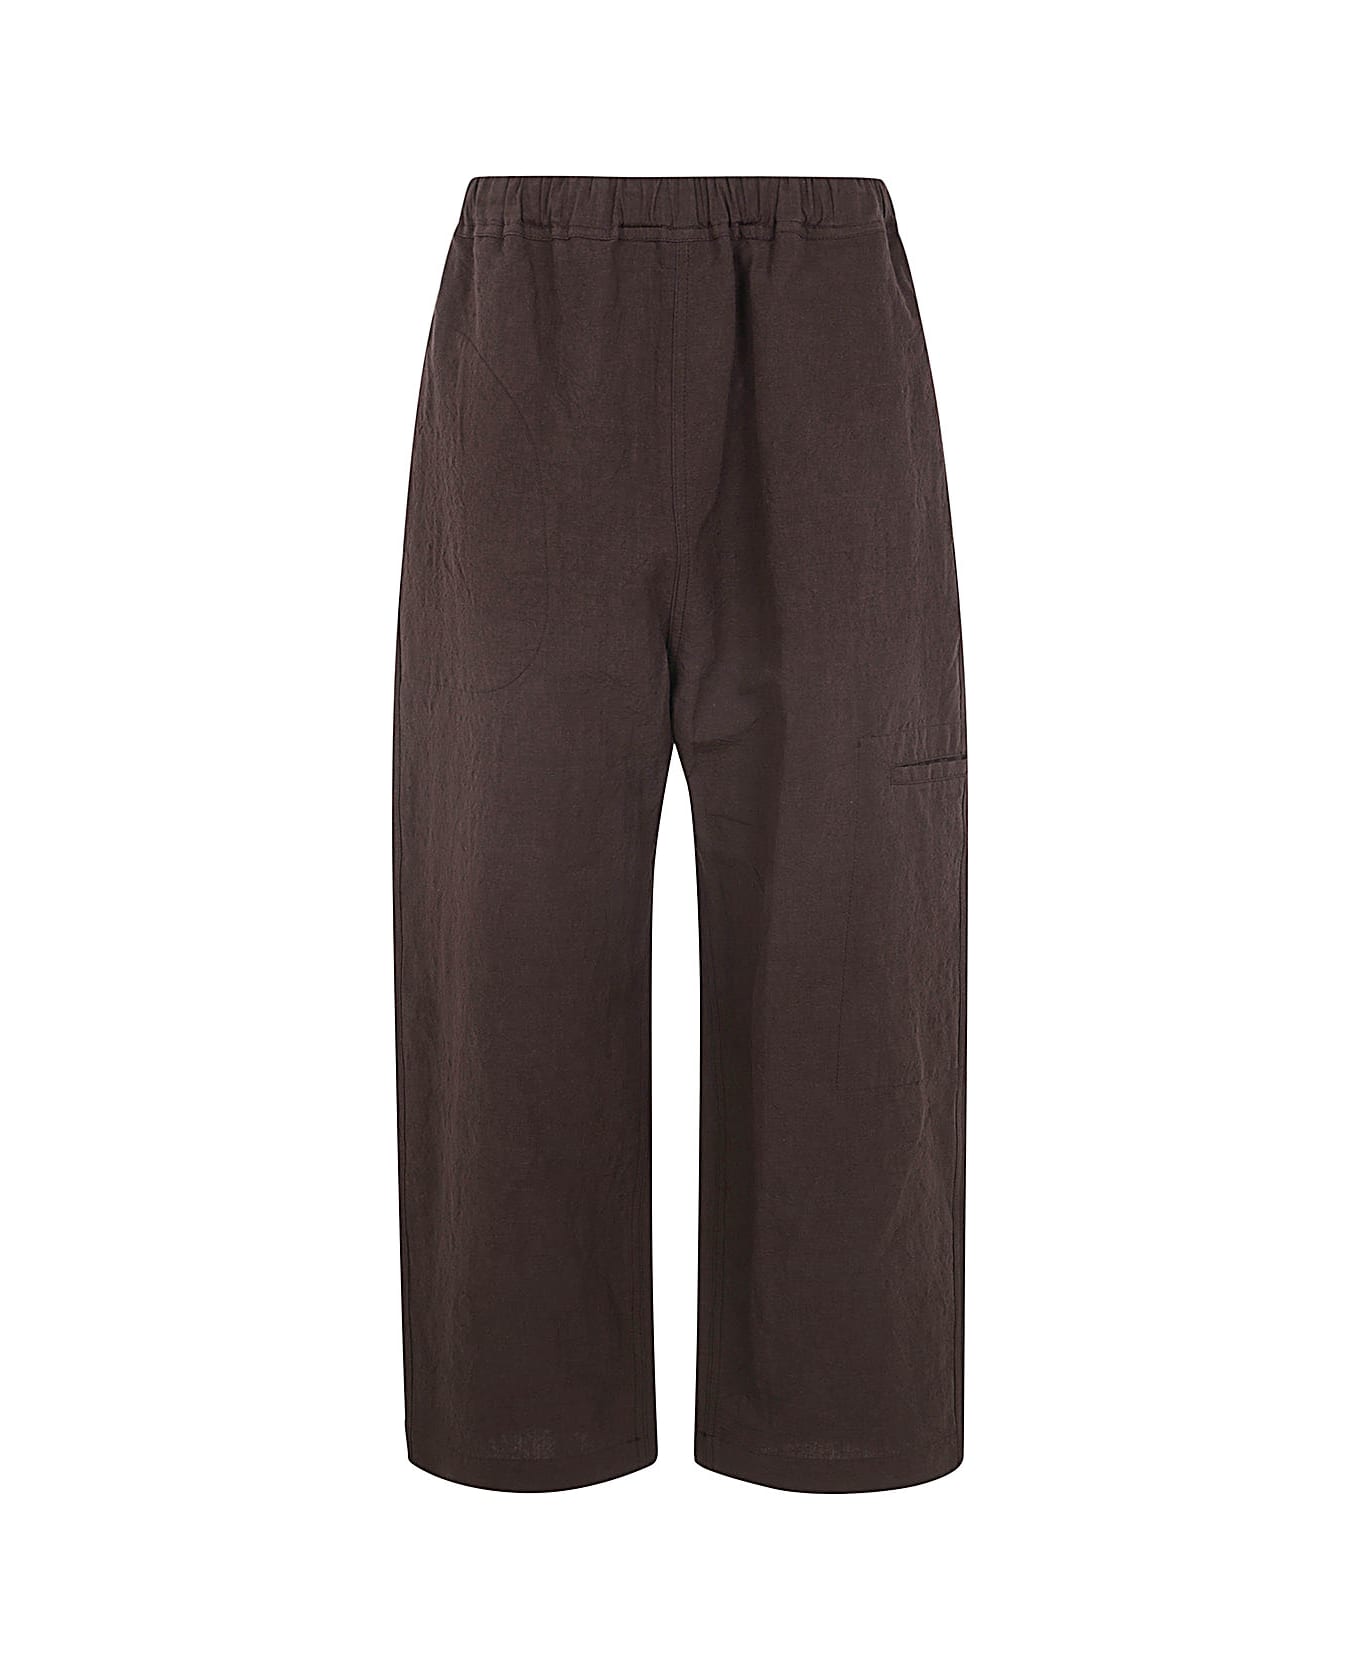 Sofie d'Hoore Wide Pants With Elastic Waist - Cacao